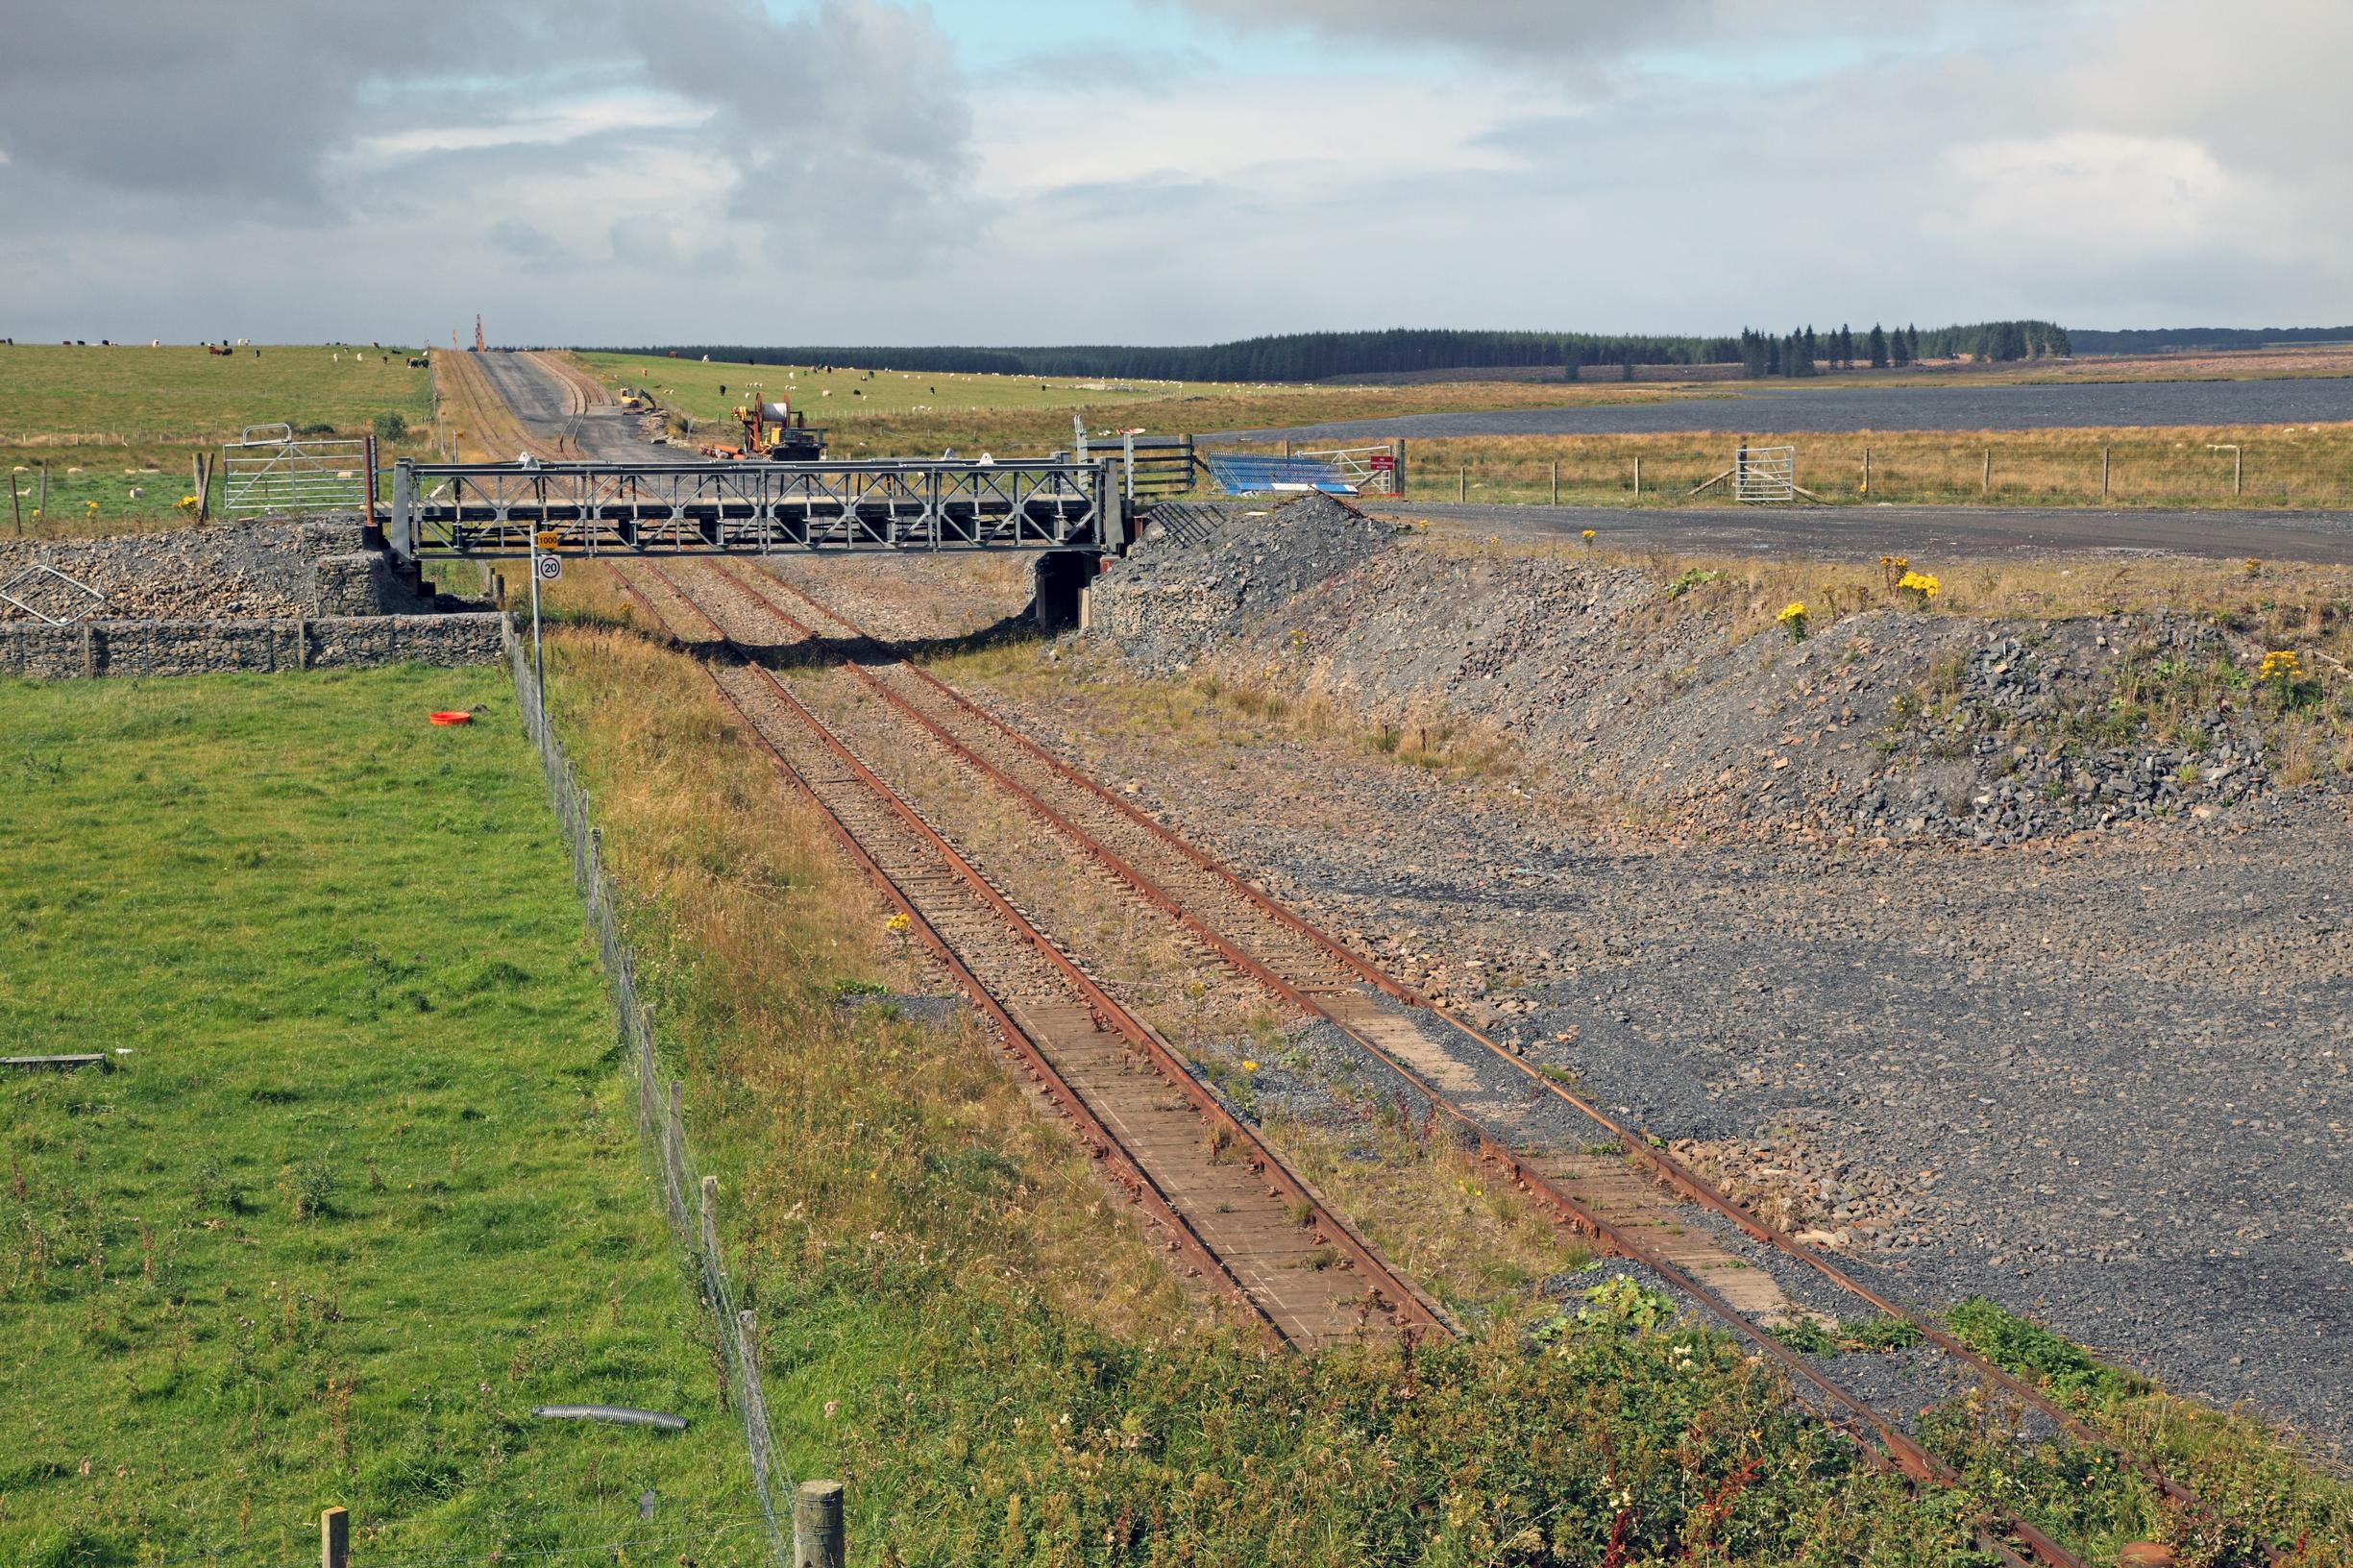 The metre-gauge railway near Wick. It’s as straight as HS2, which offers a clue to the line’s unusual purpose